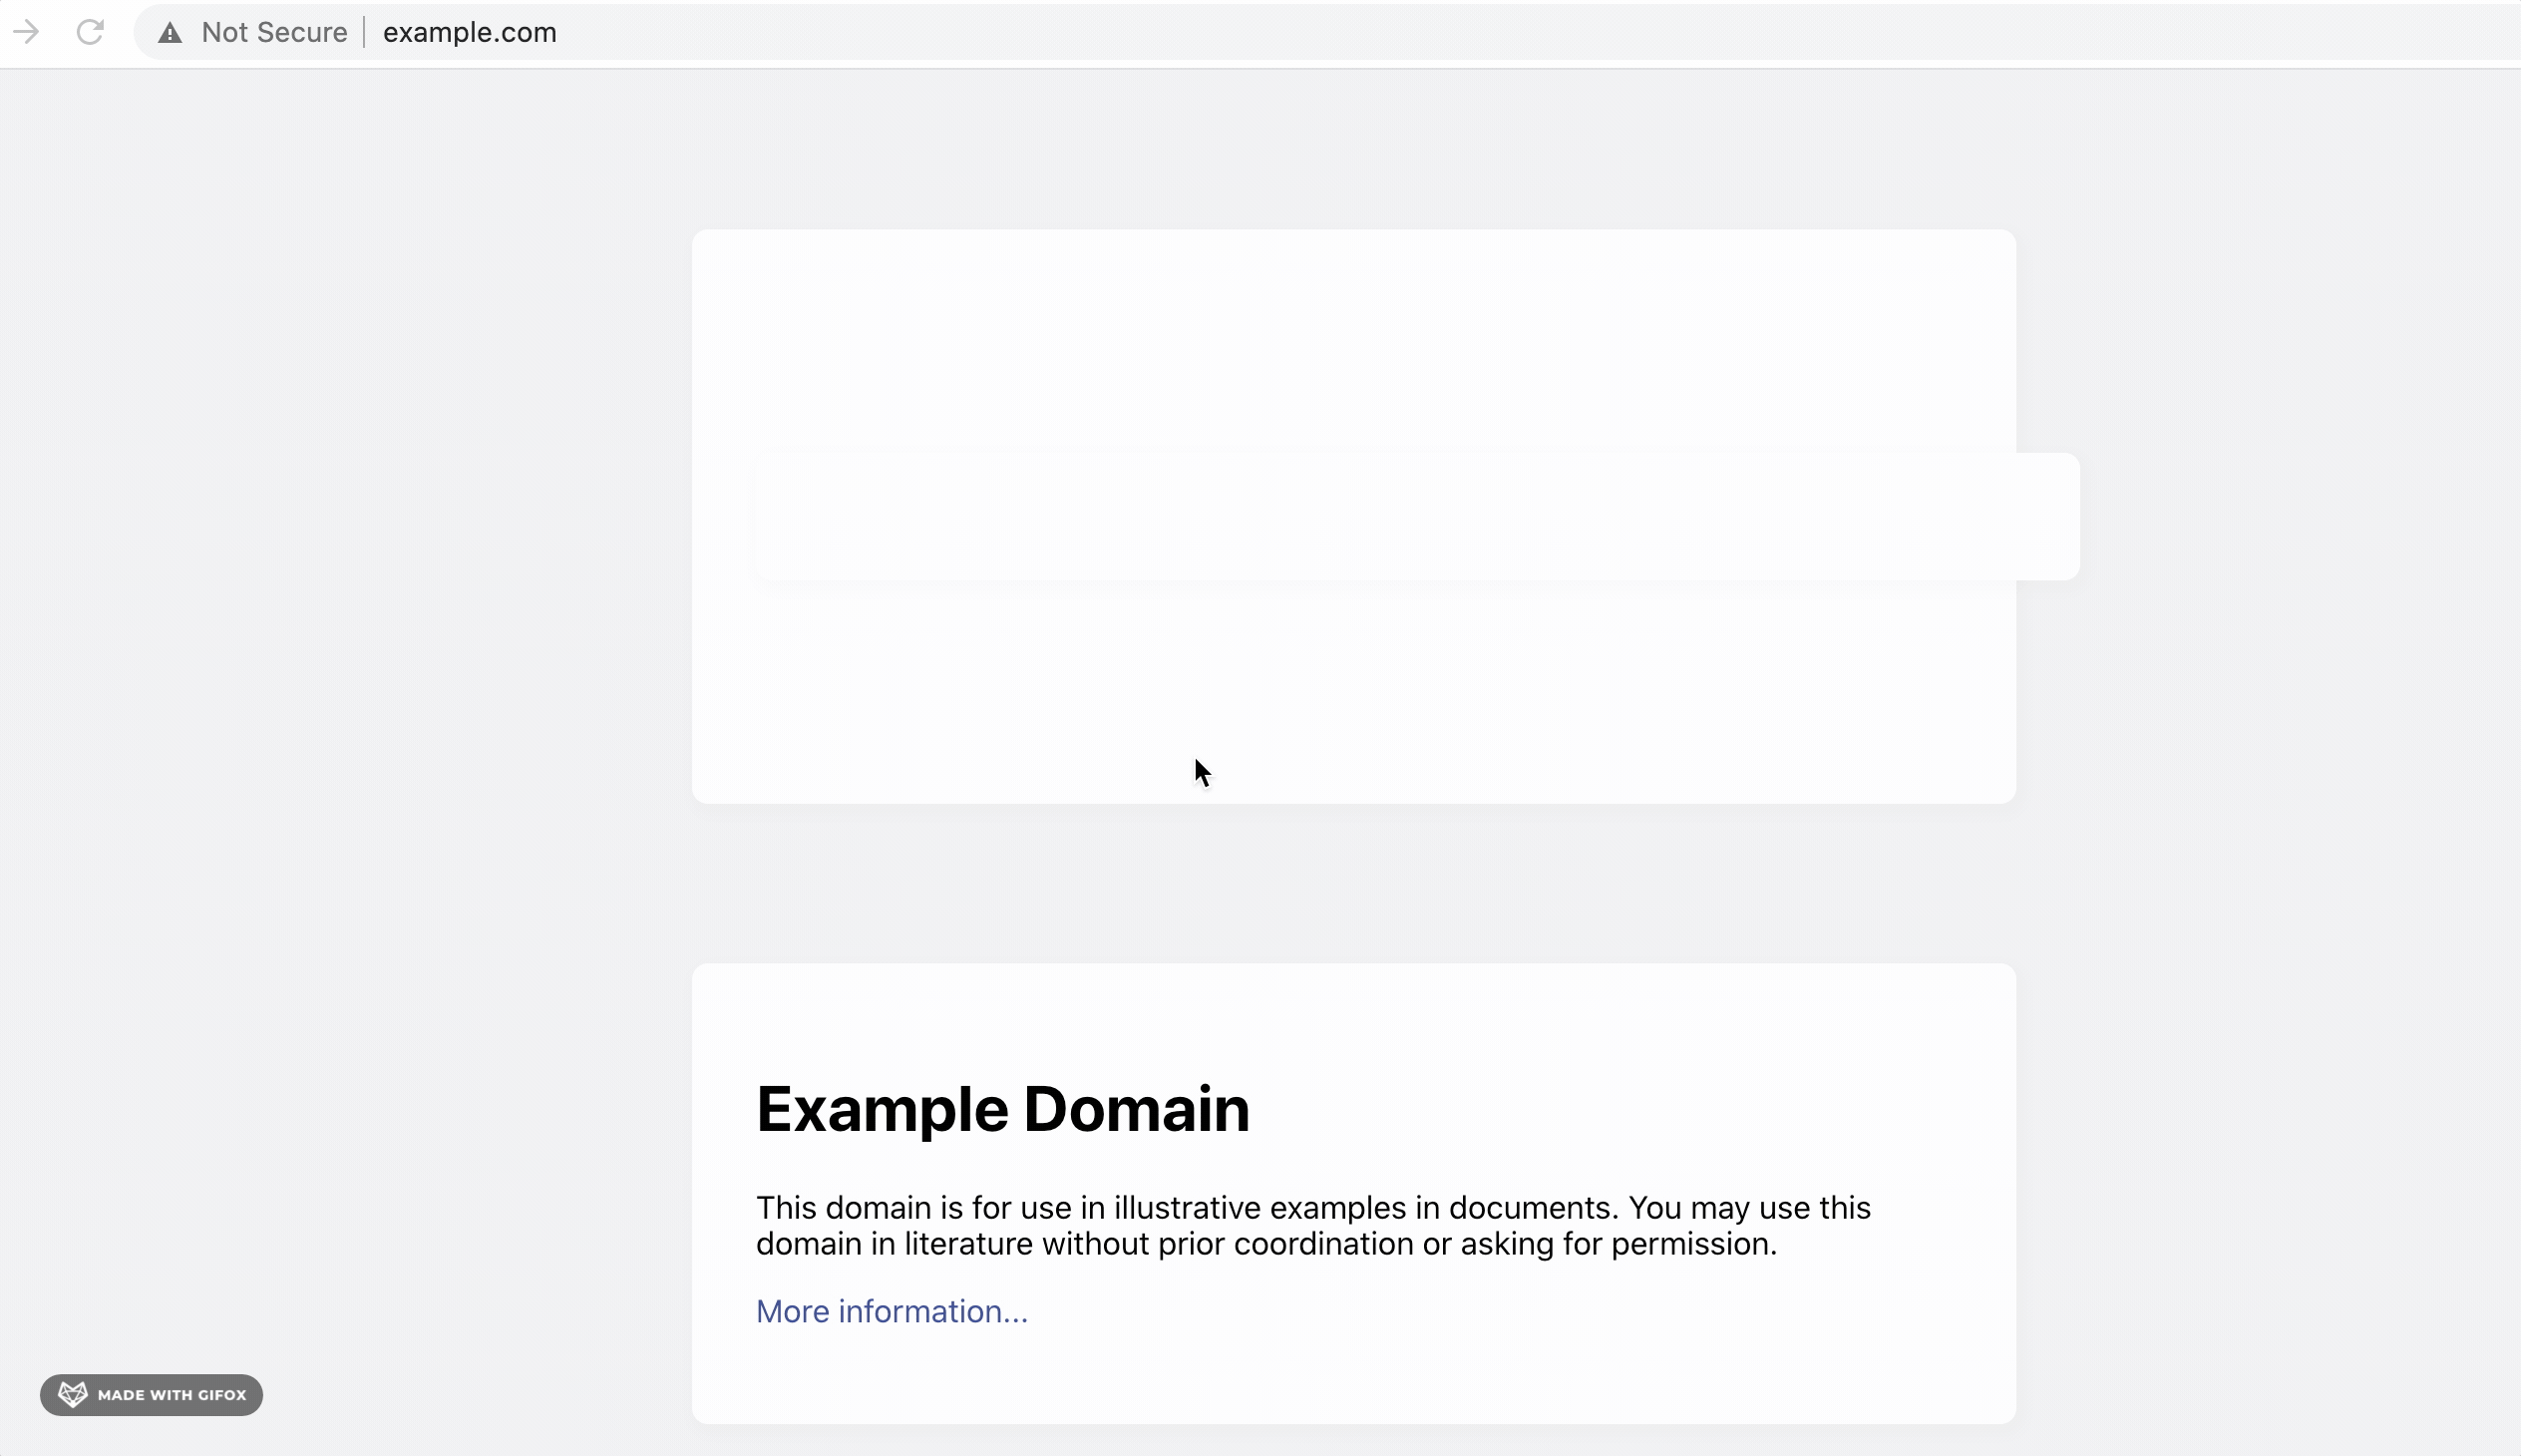 Styling conflicts between extension and example.com